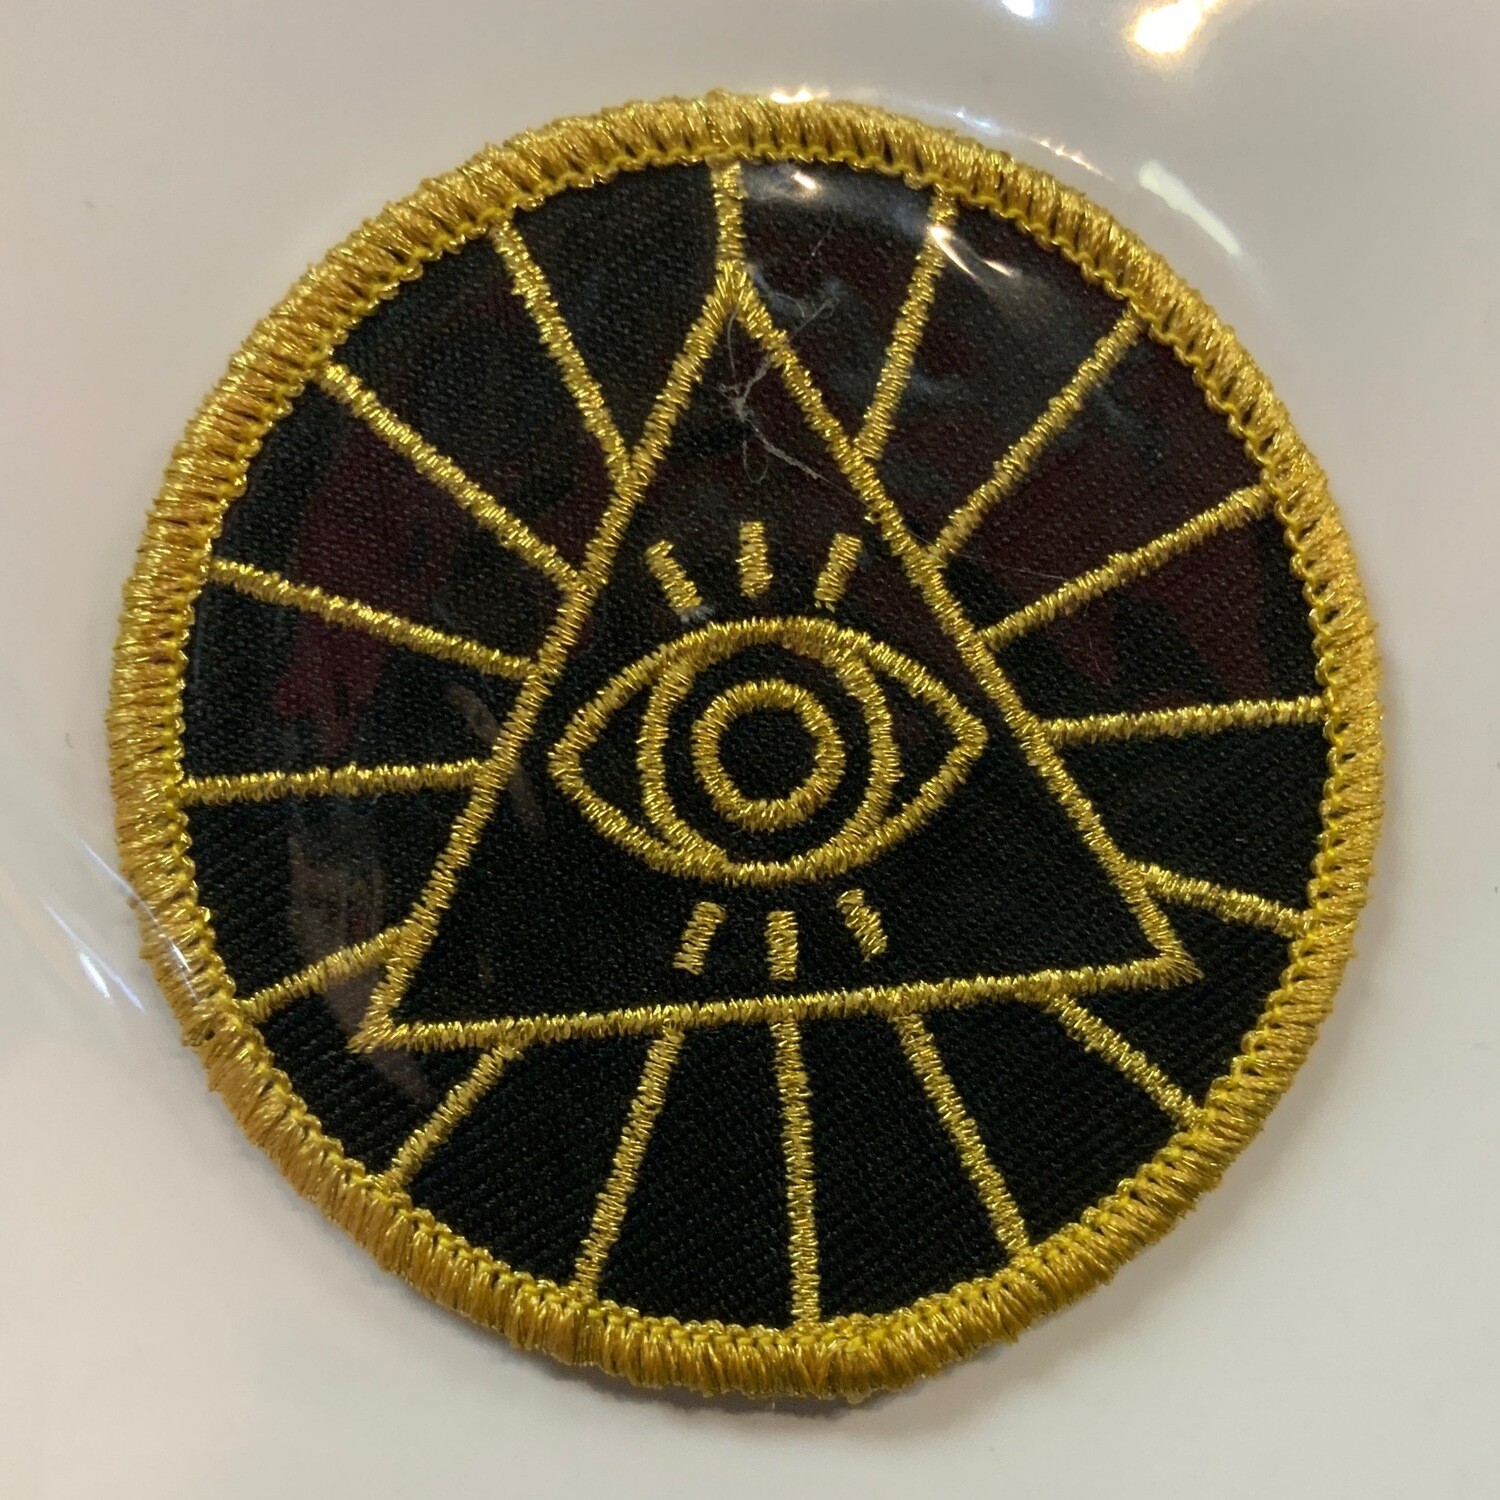 Illuminati - Embroidered Patch from These Are Things